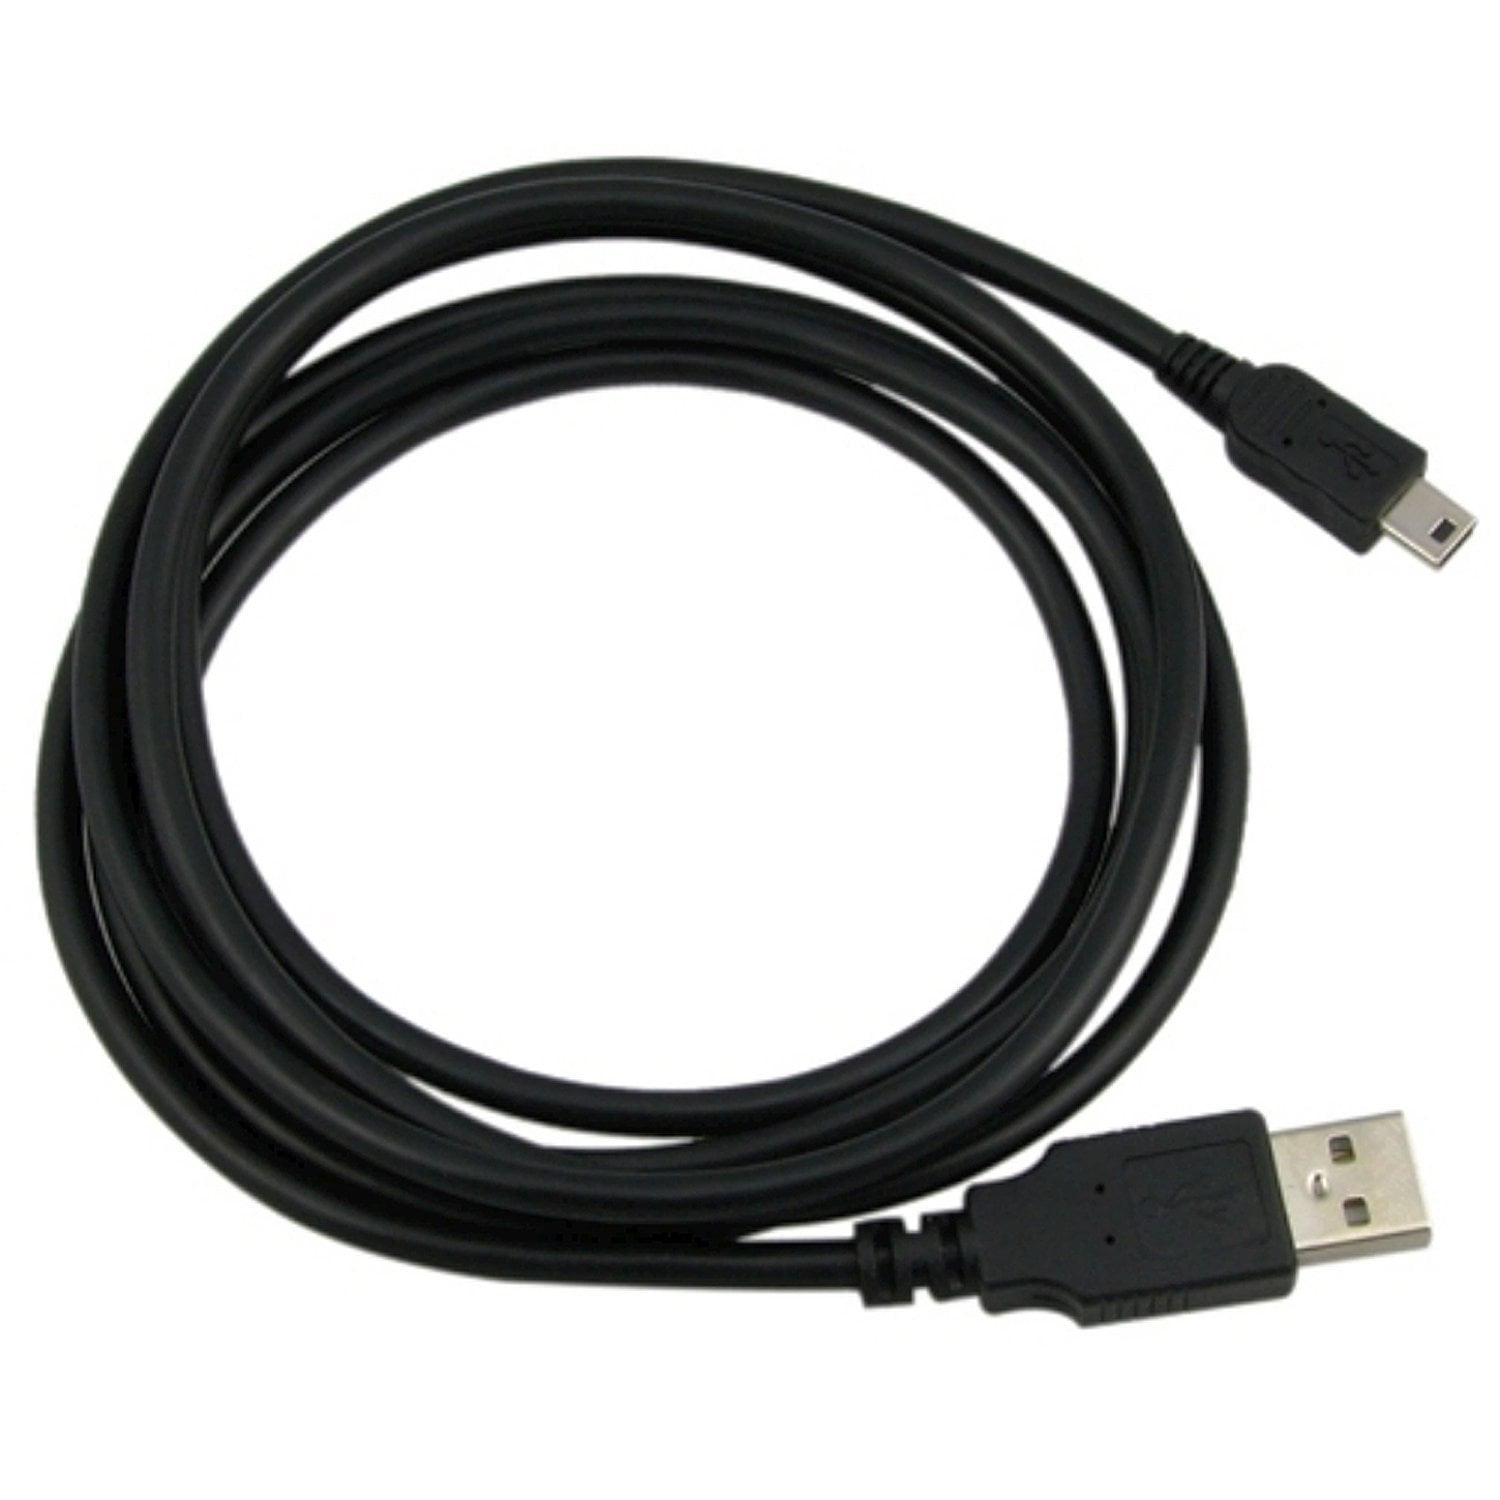 Mini USB Data Cable/Cord for Garmin GPS Nuvi 1300/LM/T 1340/LM/T 1350/LM/T/LT 